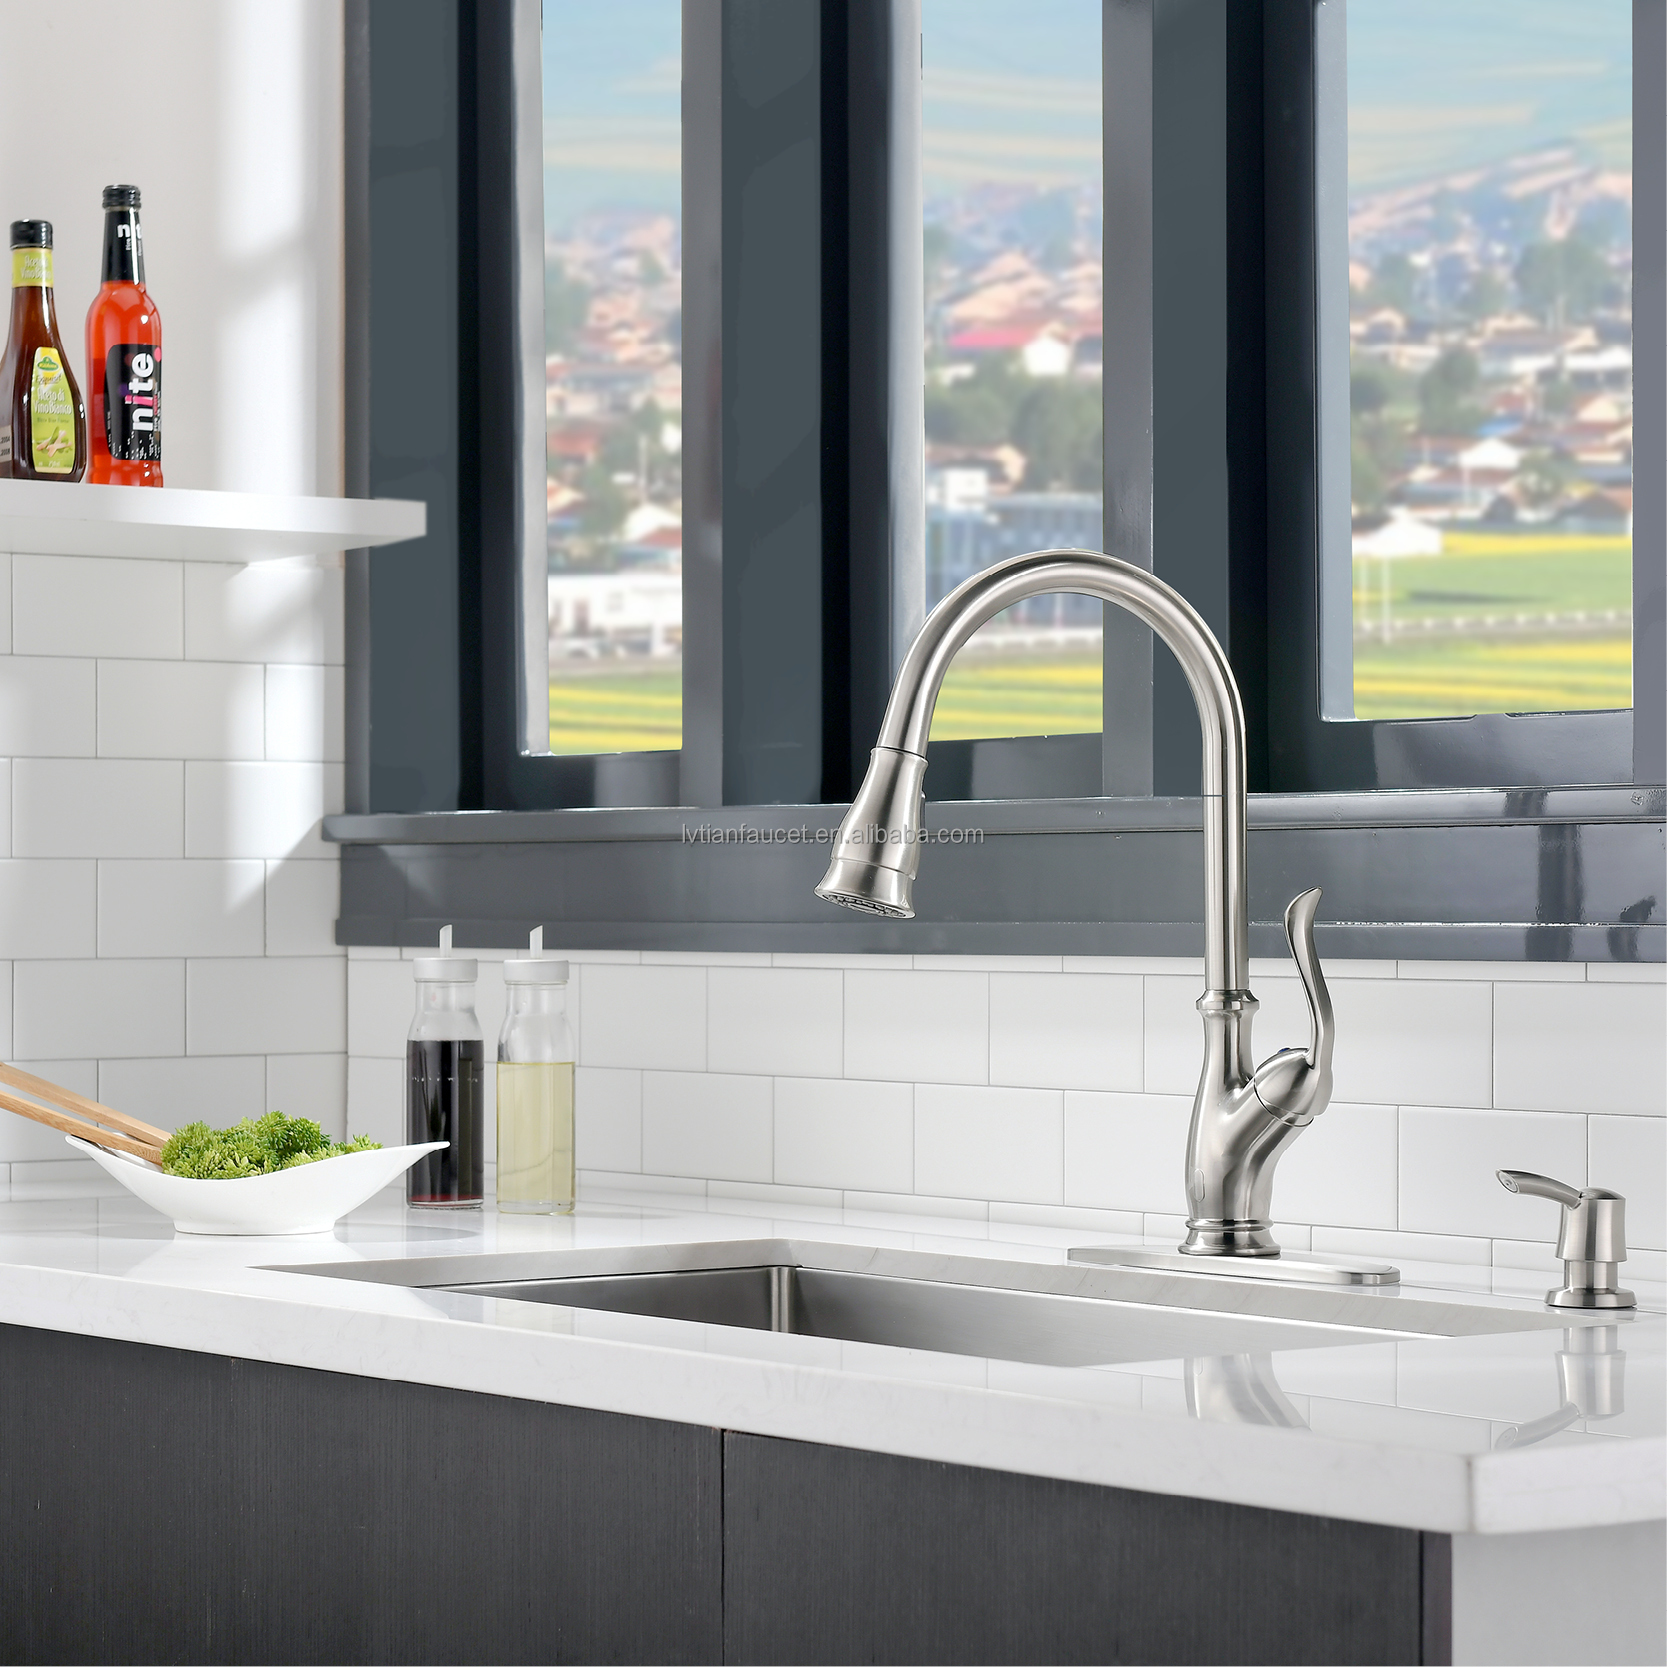 Touchless/Pull Down Kitchen Faucet - A Convenient Way to Wash Your Hands